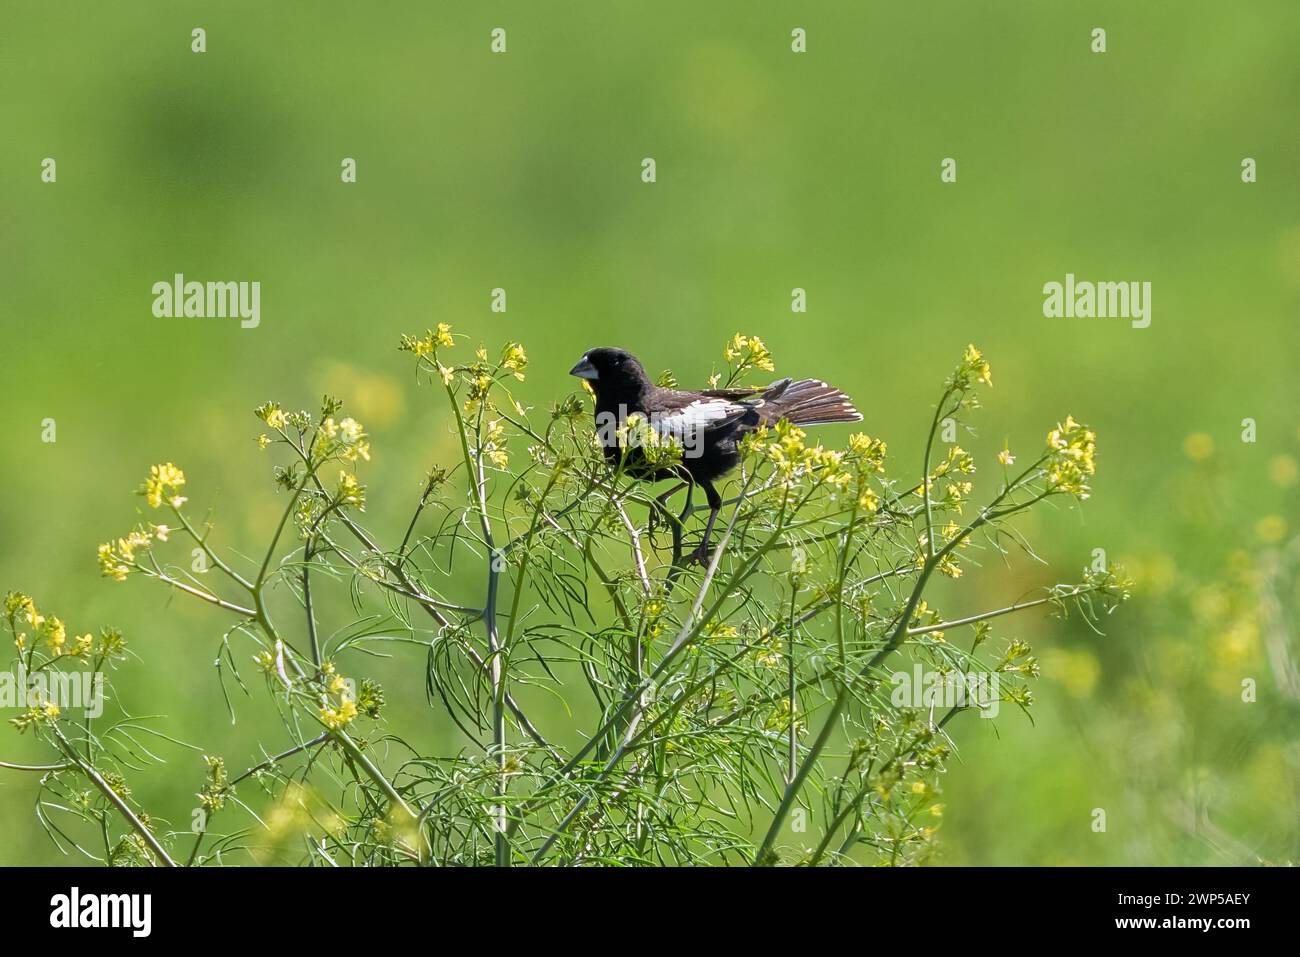 A Lark Bunting perched atop a delicate wildflower within an open green field in Colorado during its breeding season. Stock Photo